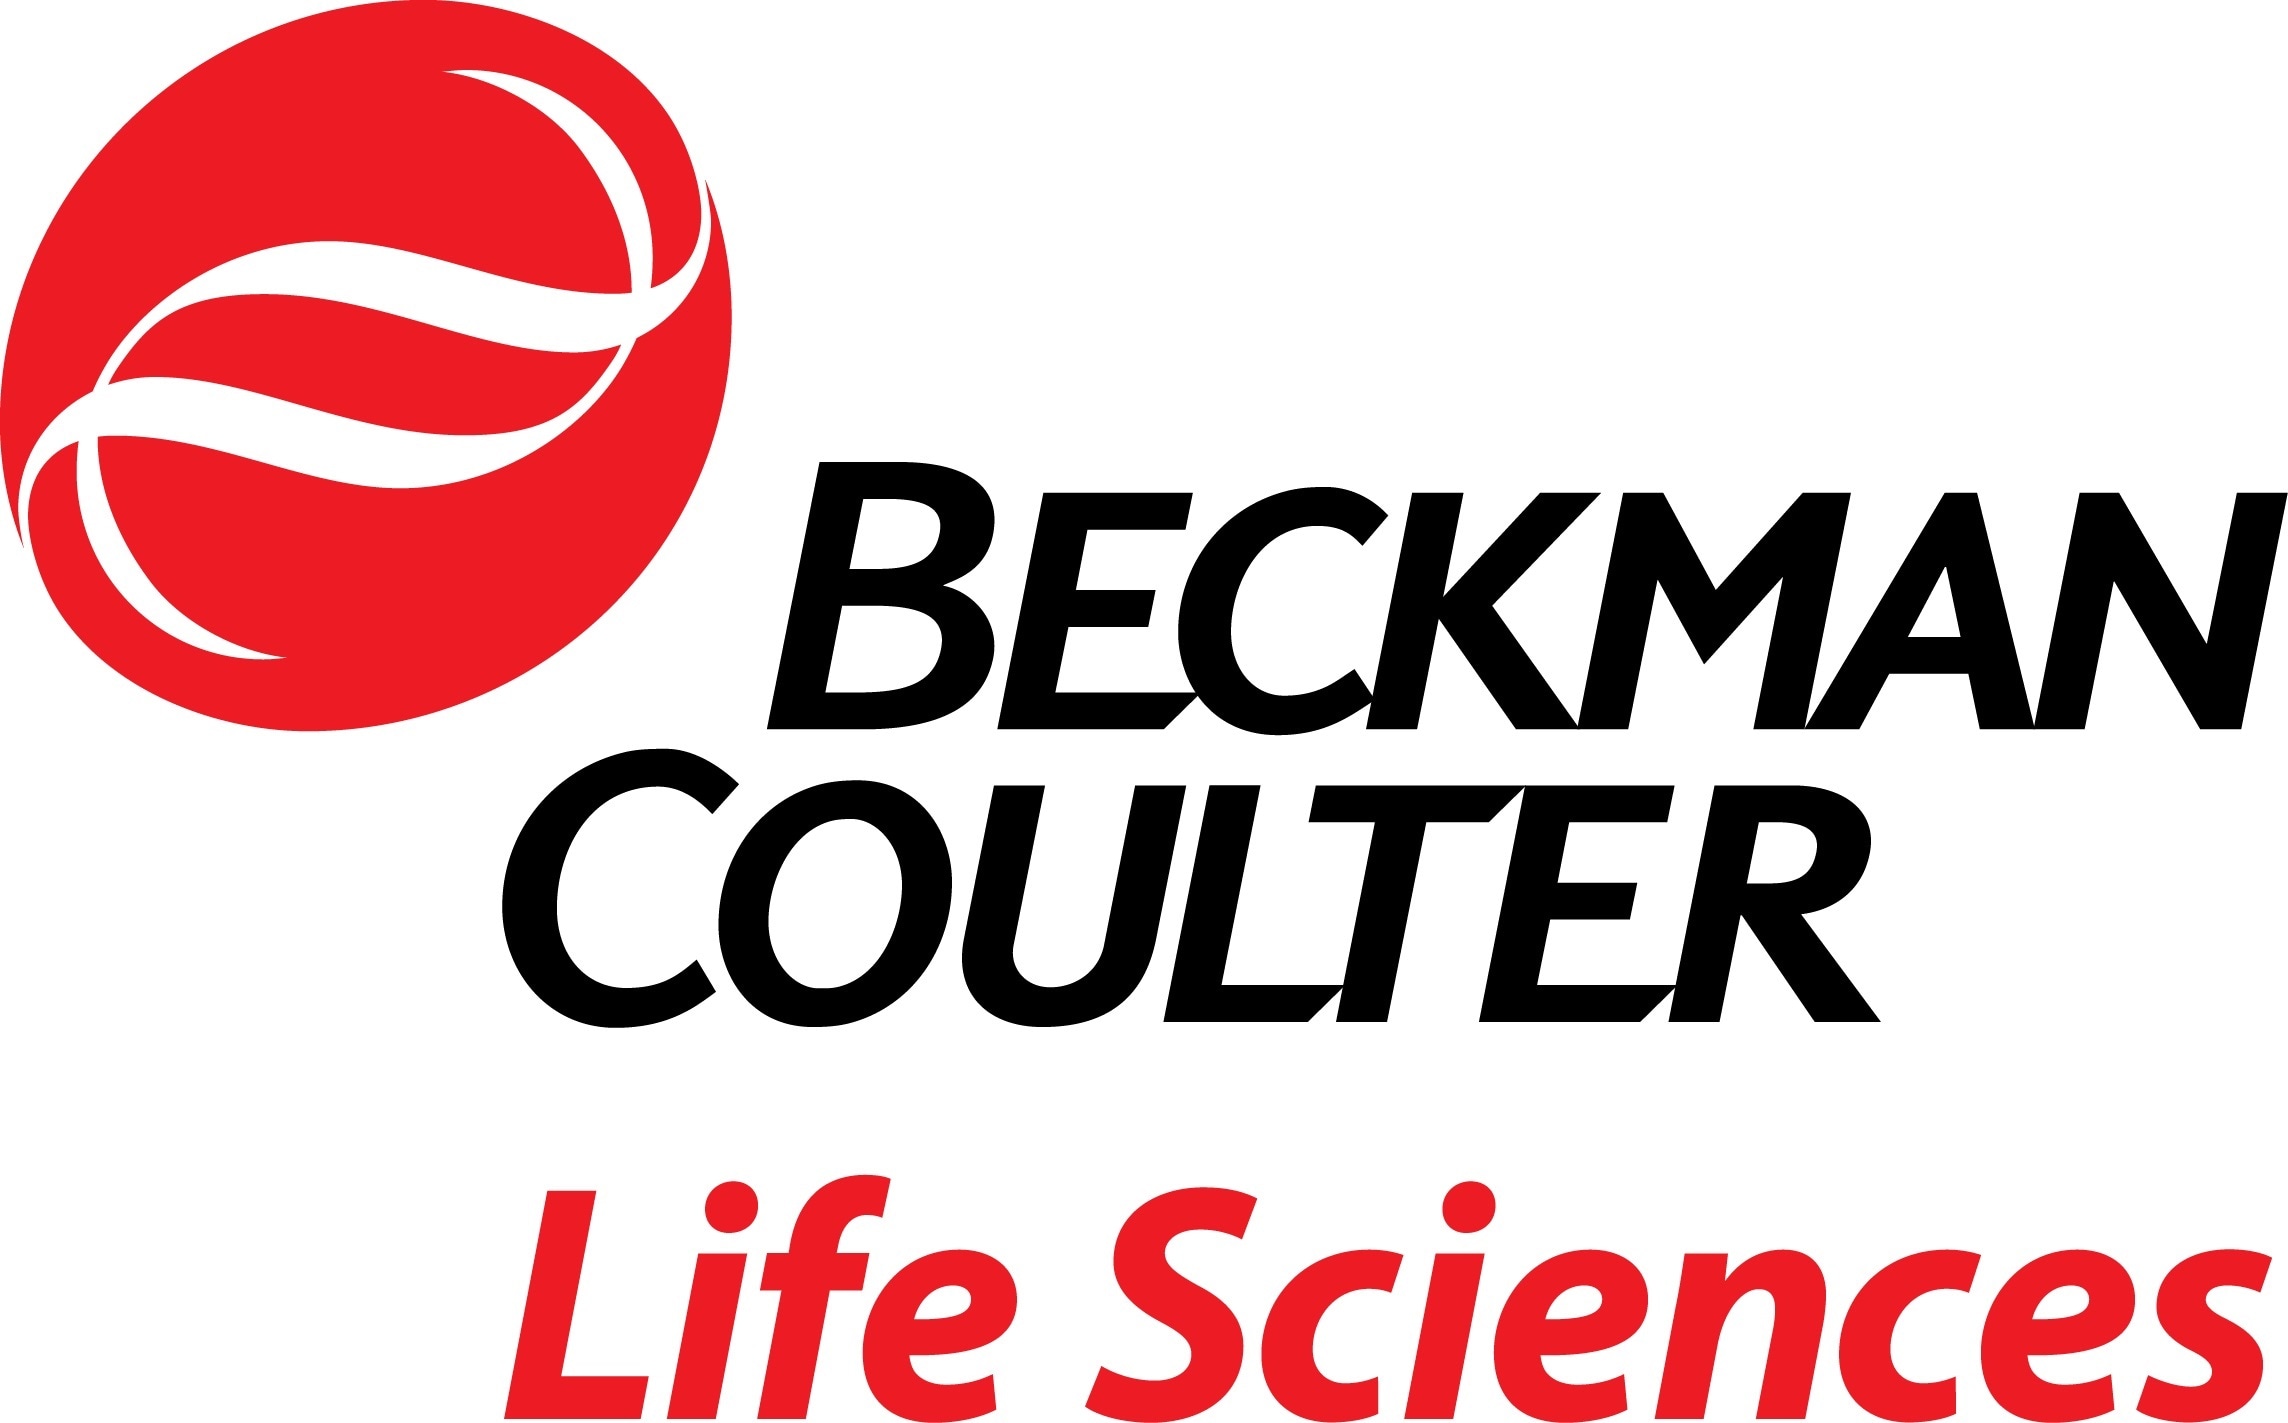 Beckman Coulter Life Sciences  - Particle Counting and Characterization